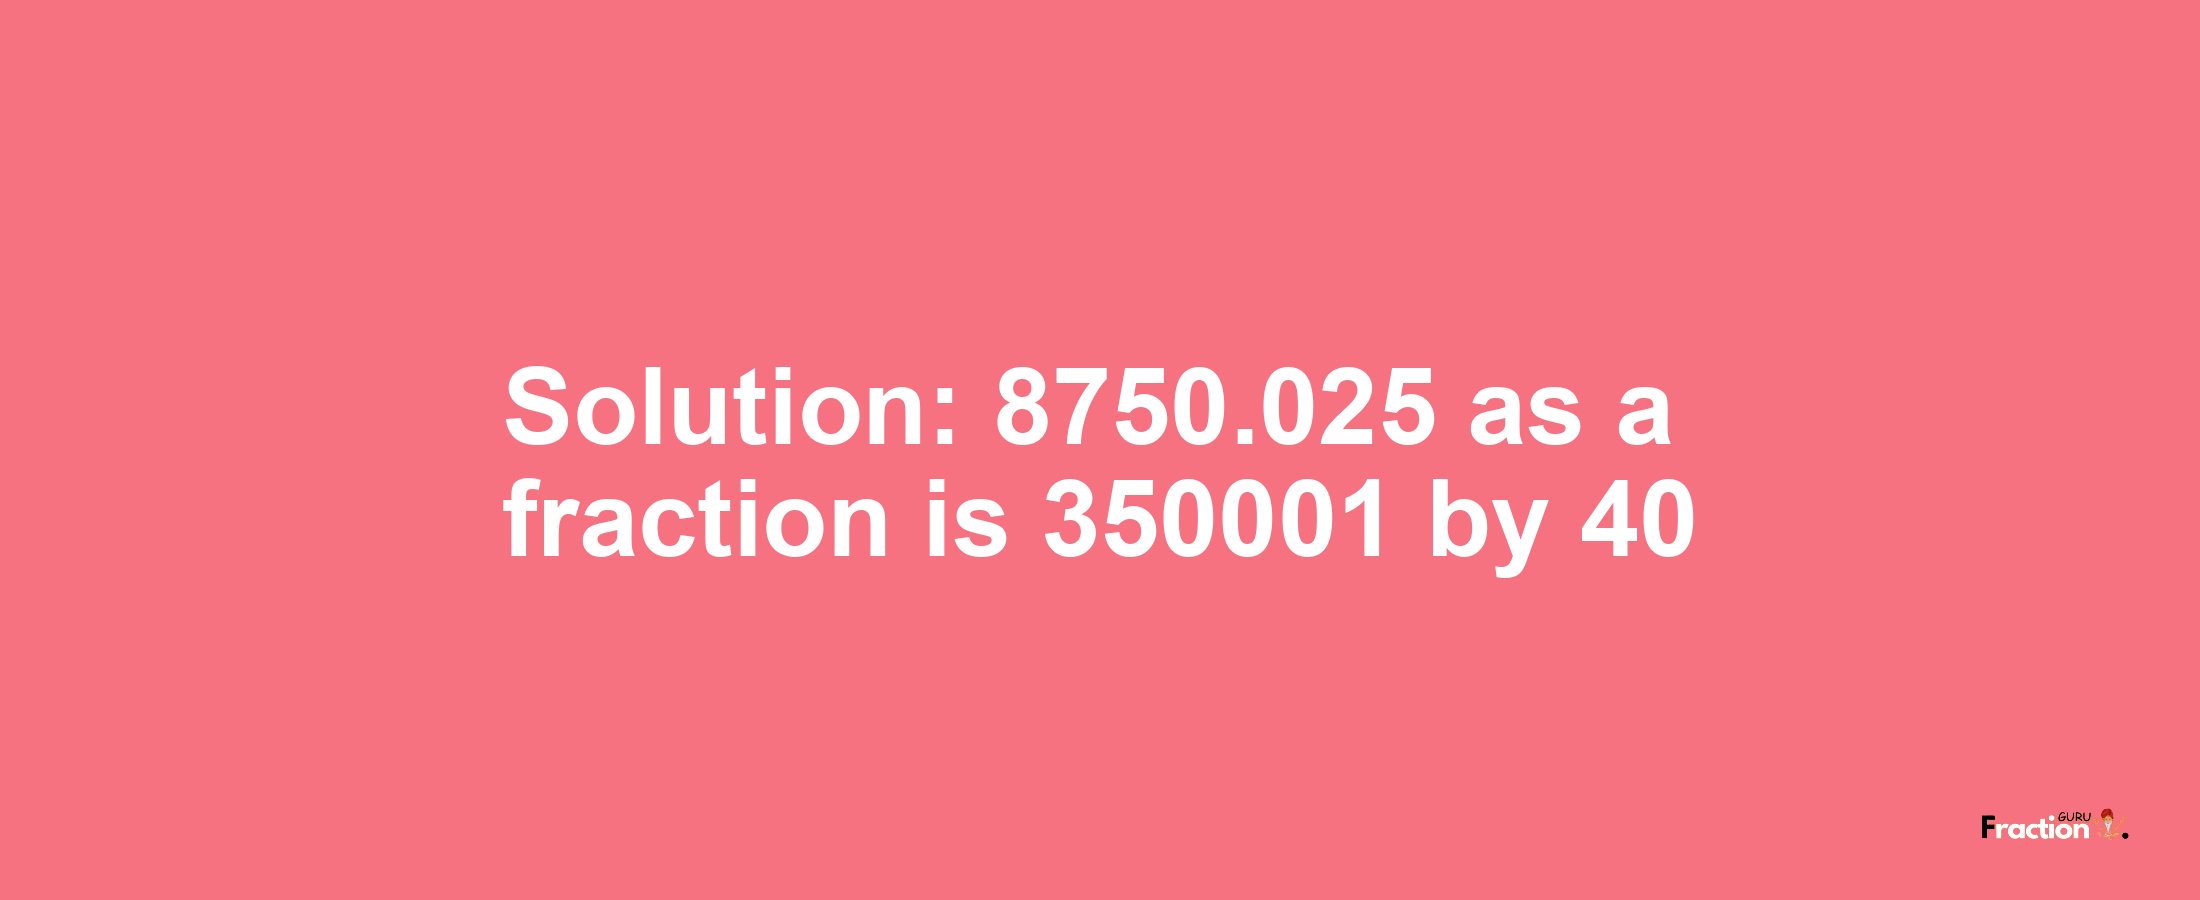 Solution:8750.025 as a fraction is 350001/40